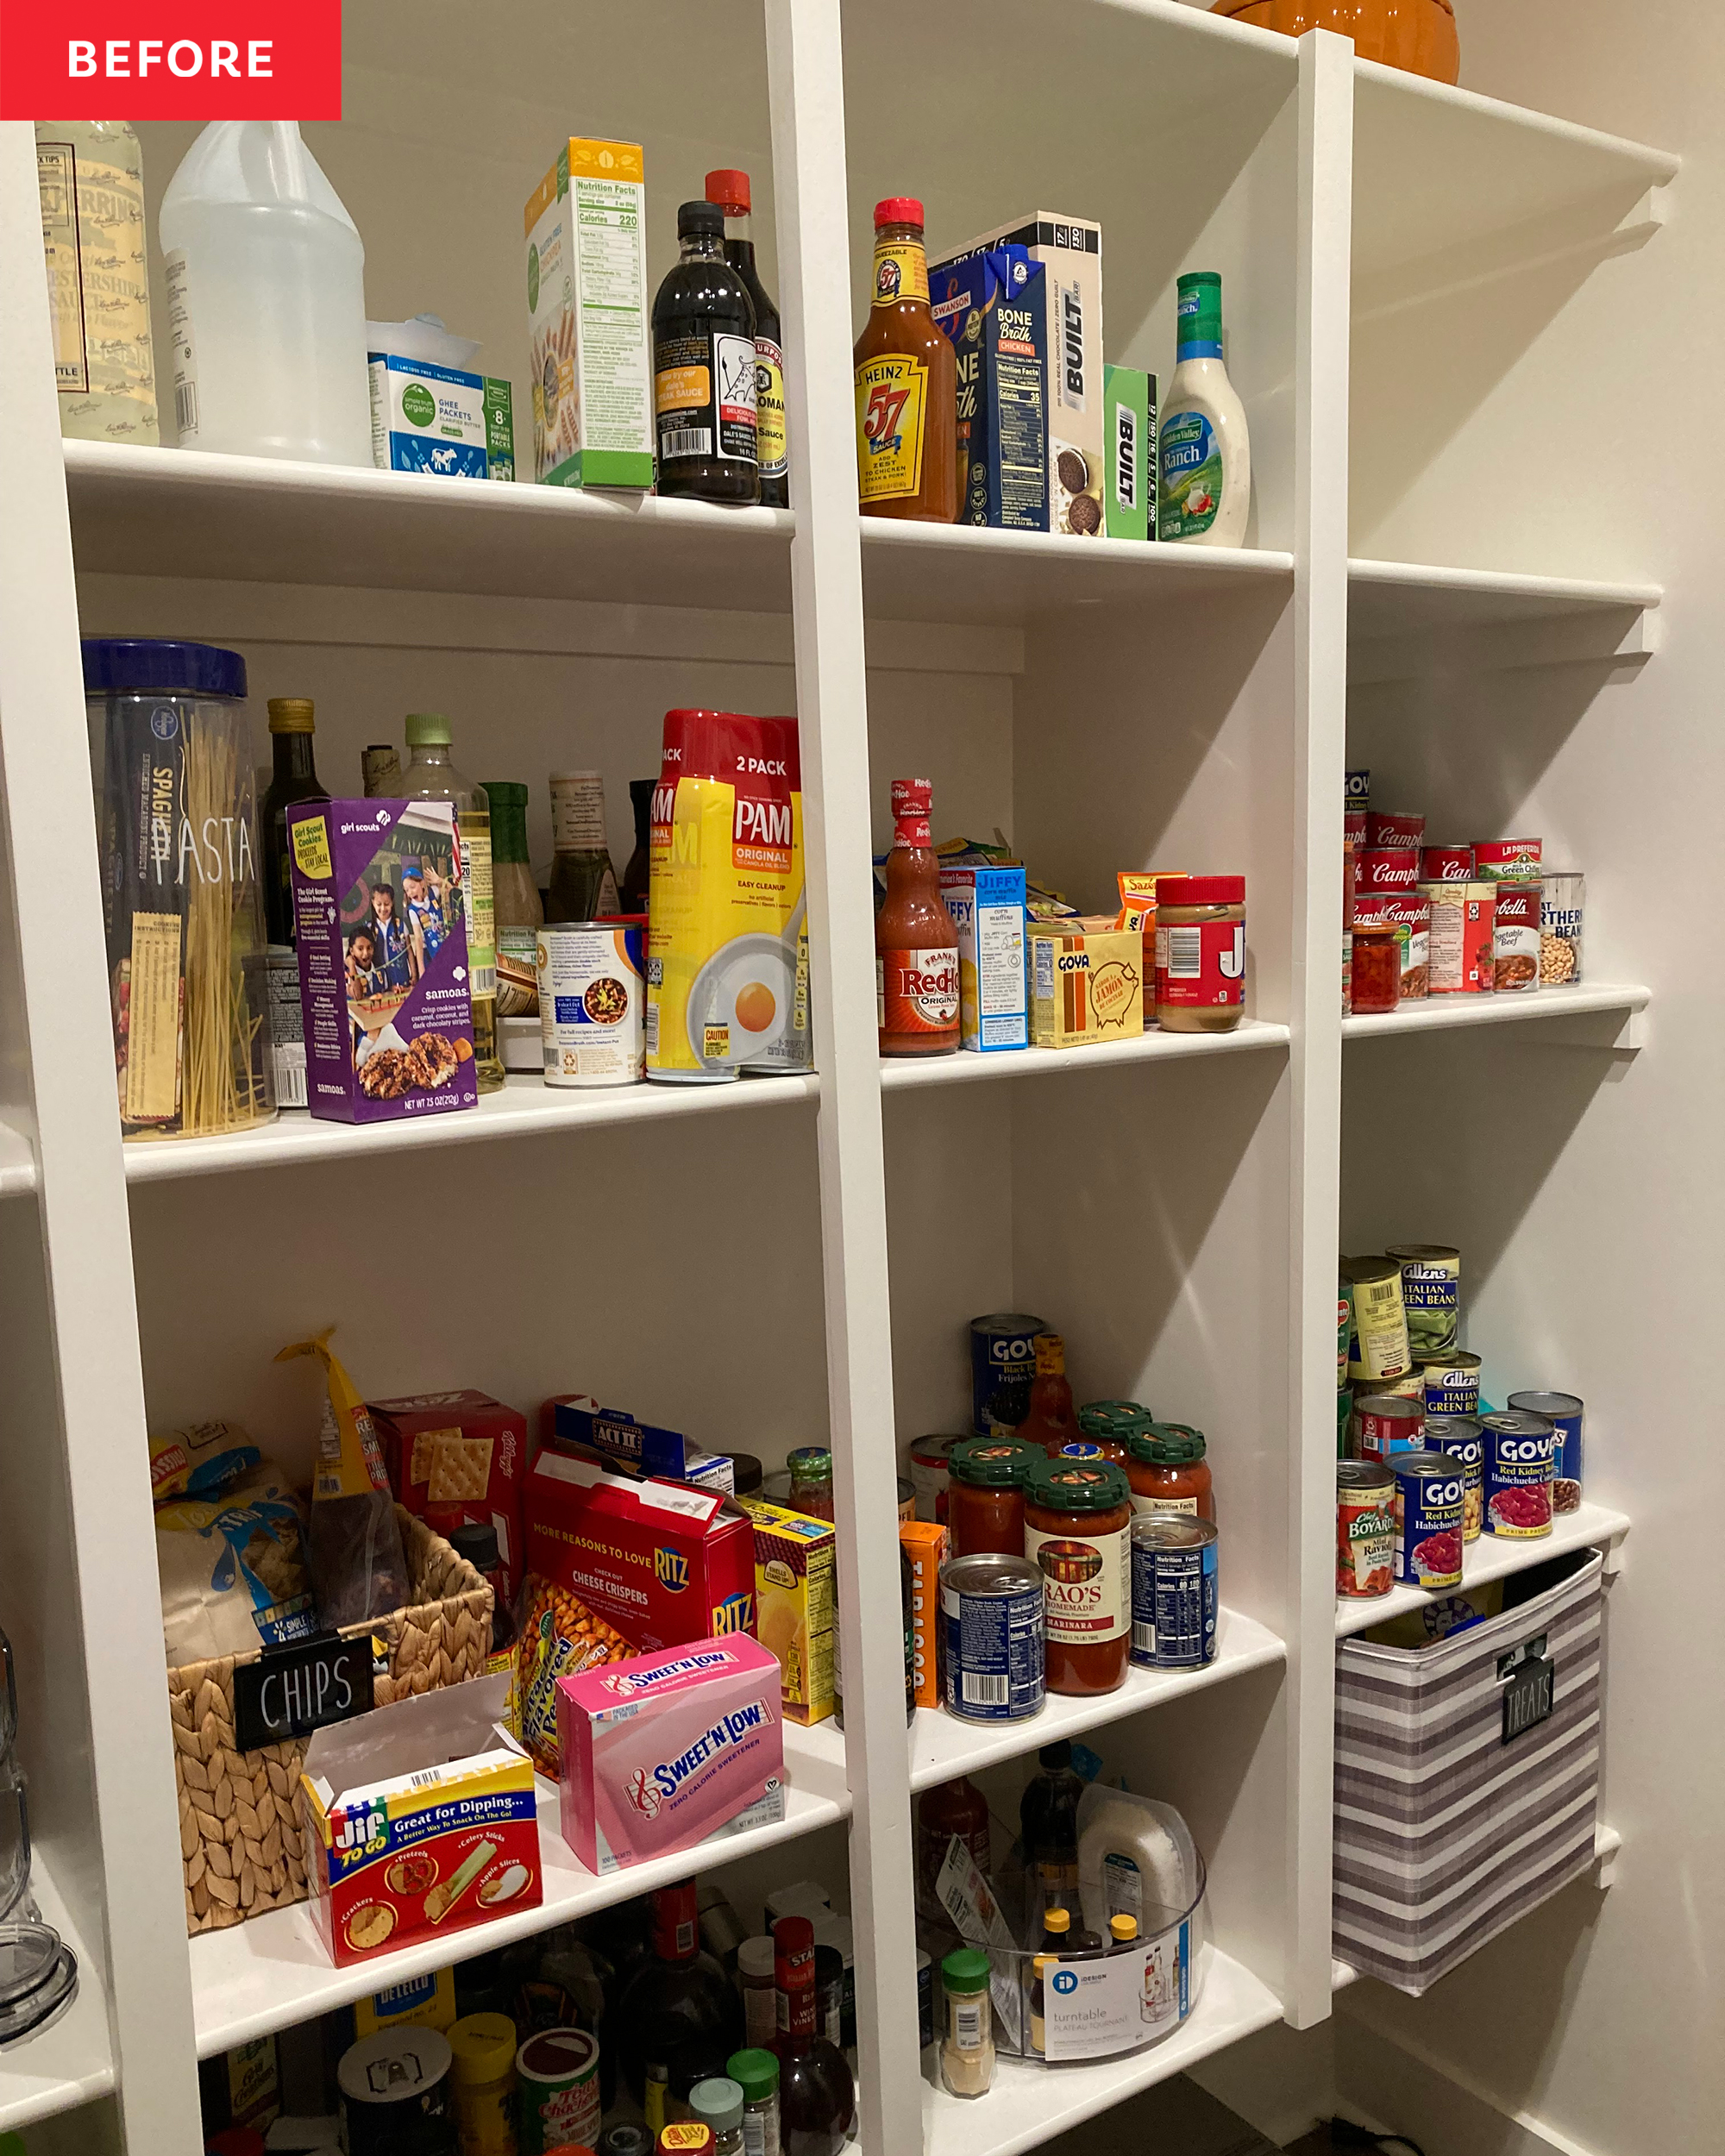 B&A: An Extremely Congested Pantry is Refreshed